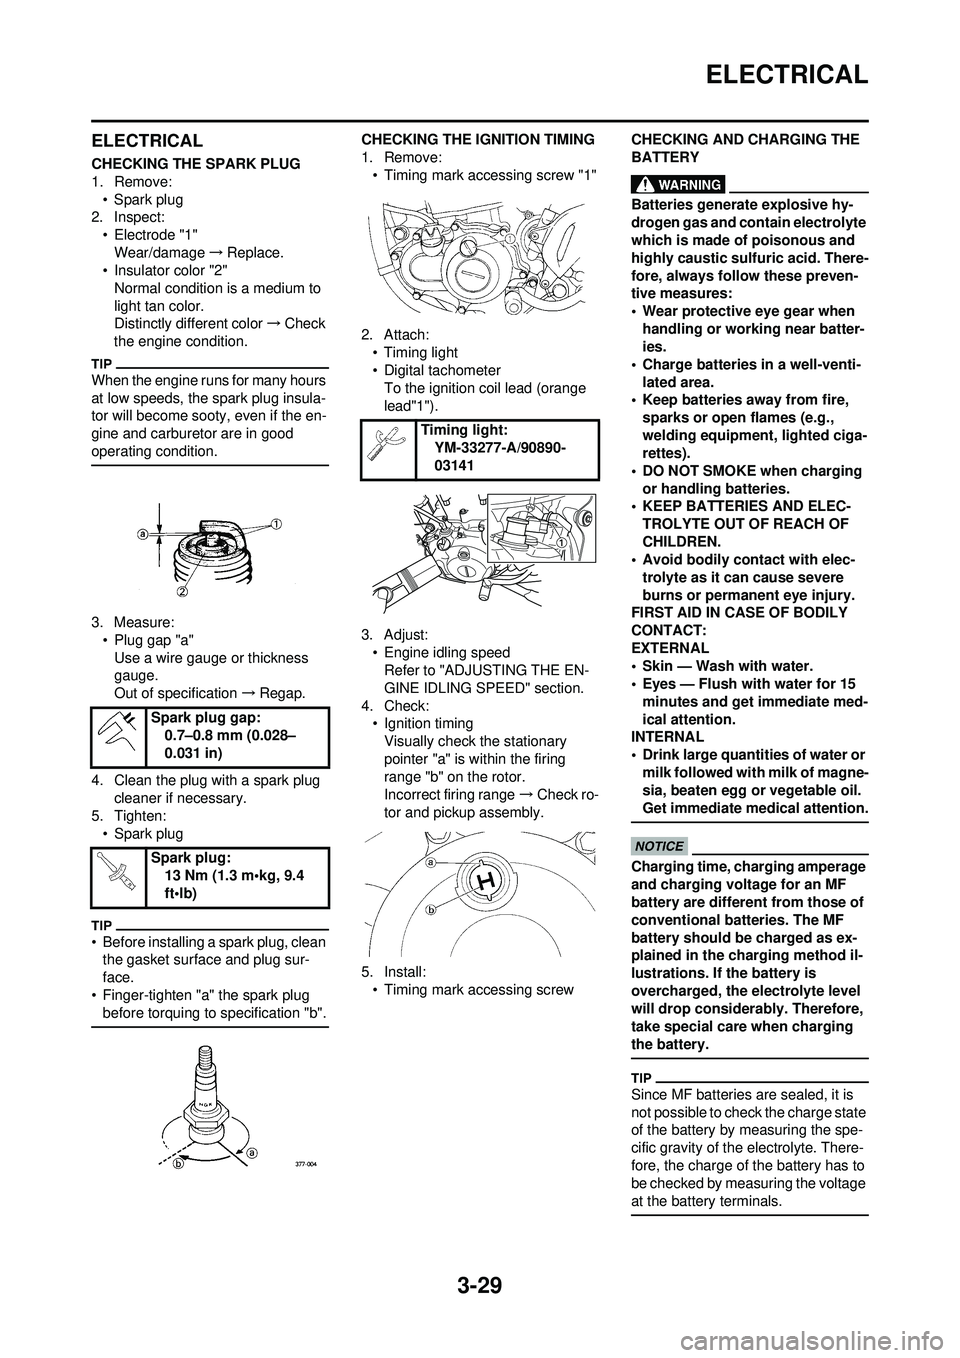 YAMAHA WR 250F 2009  Owners Manual 3-29
ELECTRICAL
ELECTRICAL
CHECKING THE SPARK PLUG
1. Remove:• Spark plug
2. Inspect:
• Electrode "1"Wear/damage →Replace.
• Insulator color "2"
Normal condition is a medium to 
light tan colo